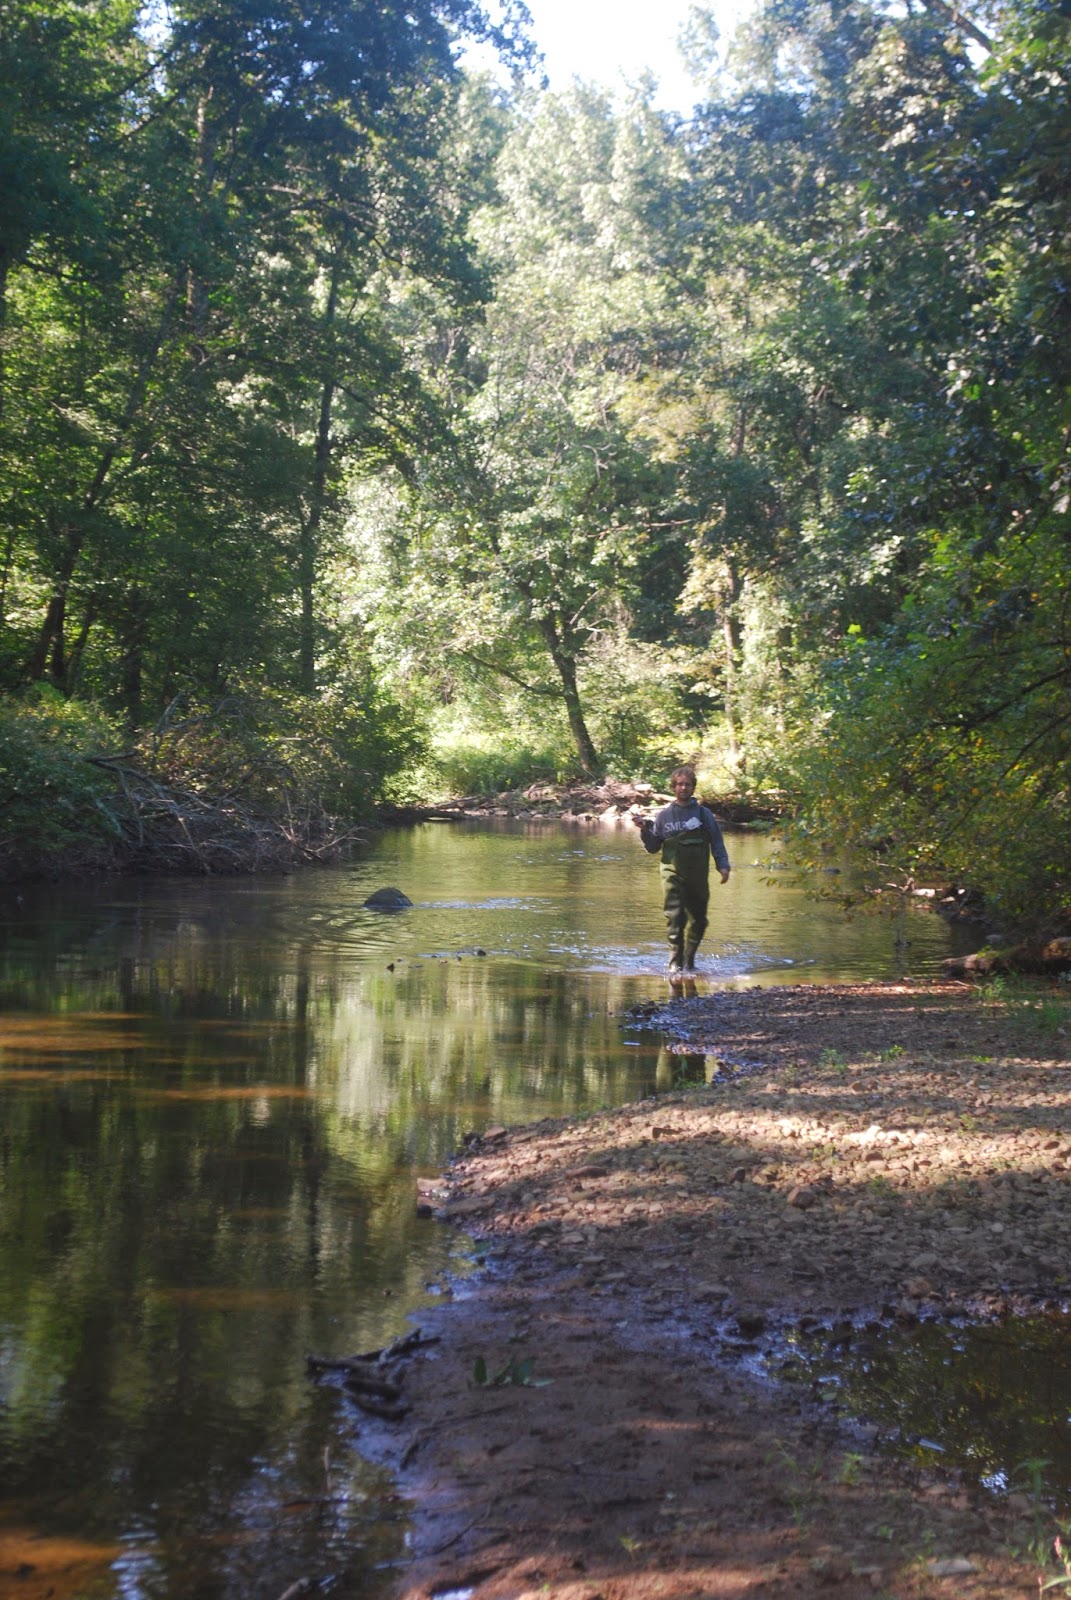 Litton's Fishing Lines: Fly Fishing the Claremont South Branch Raritan River